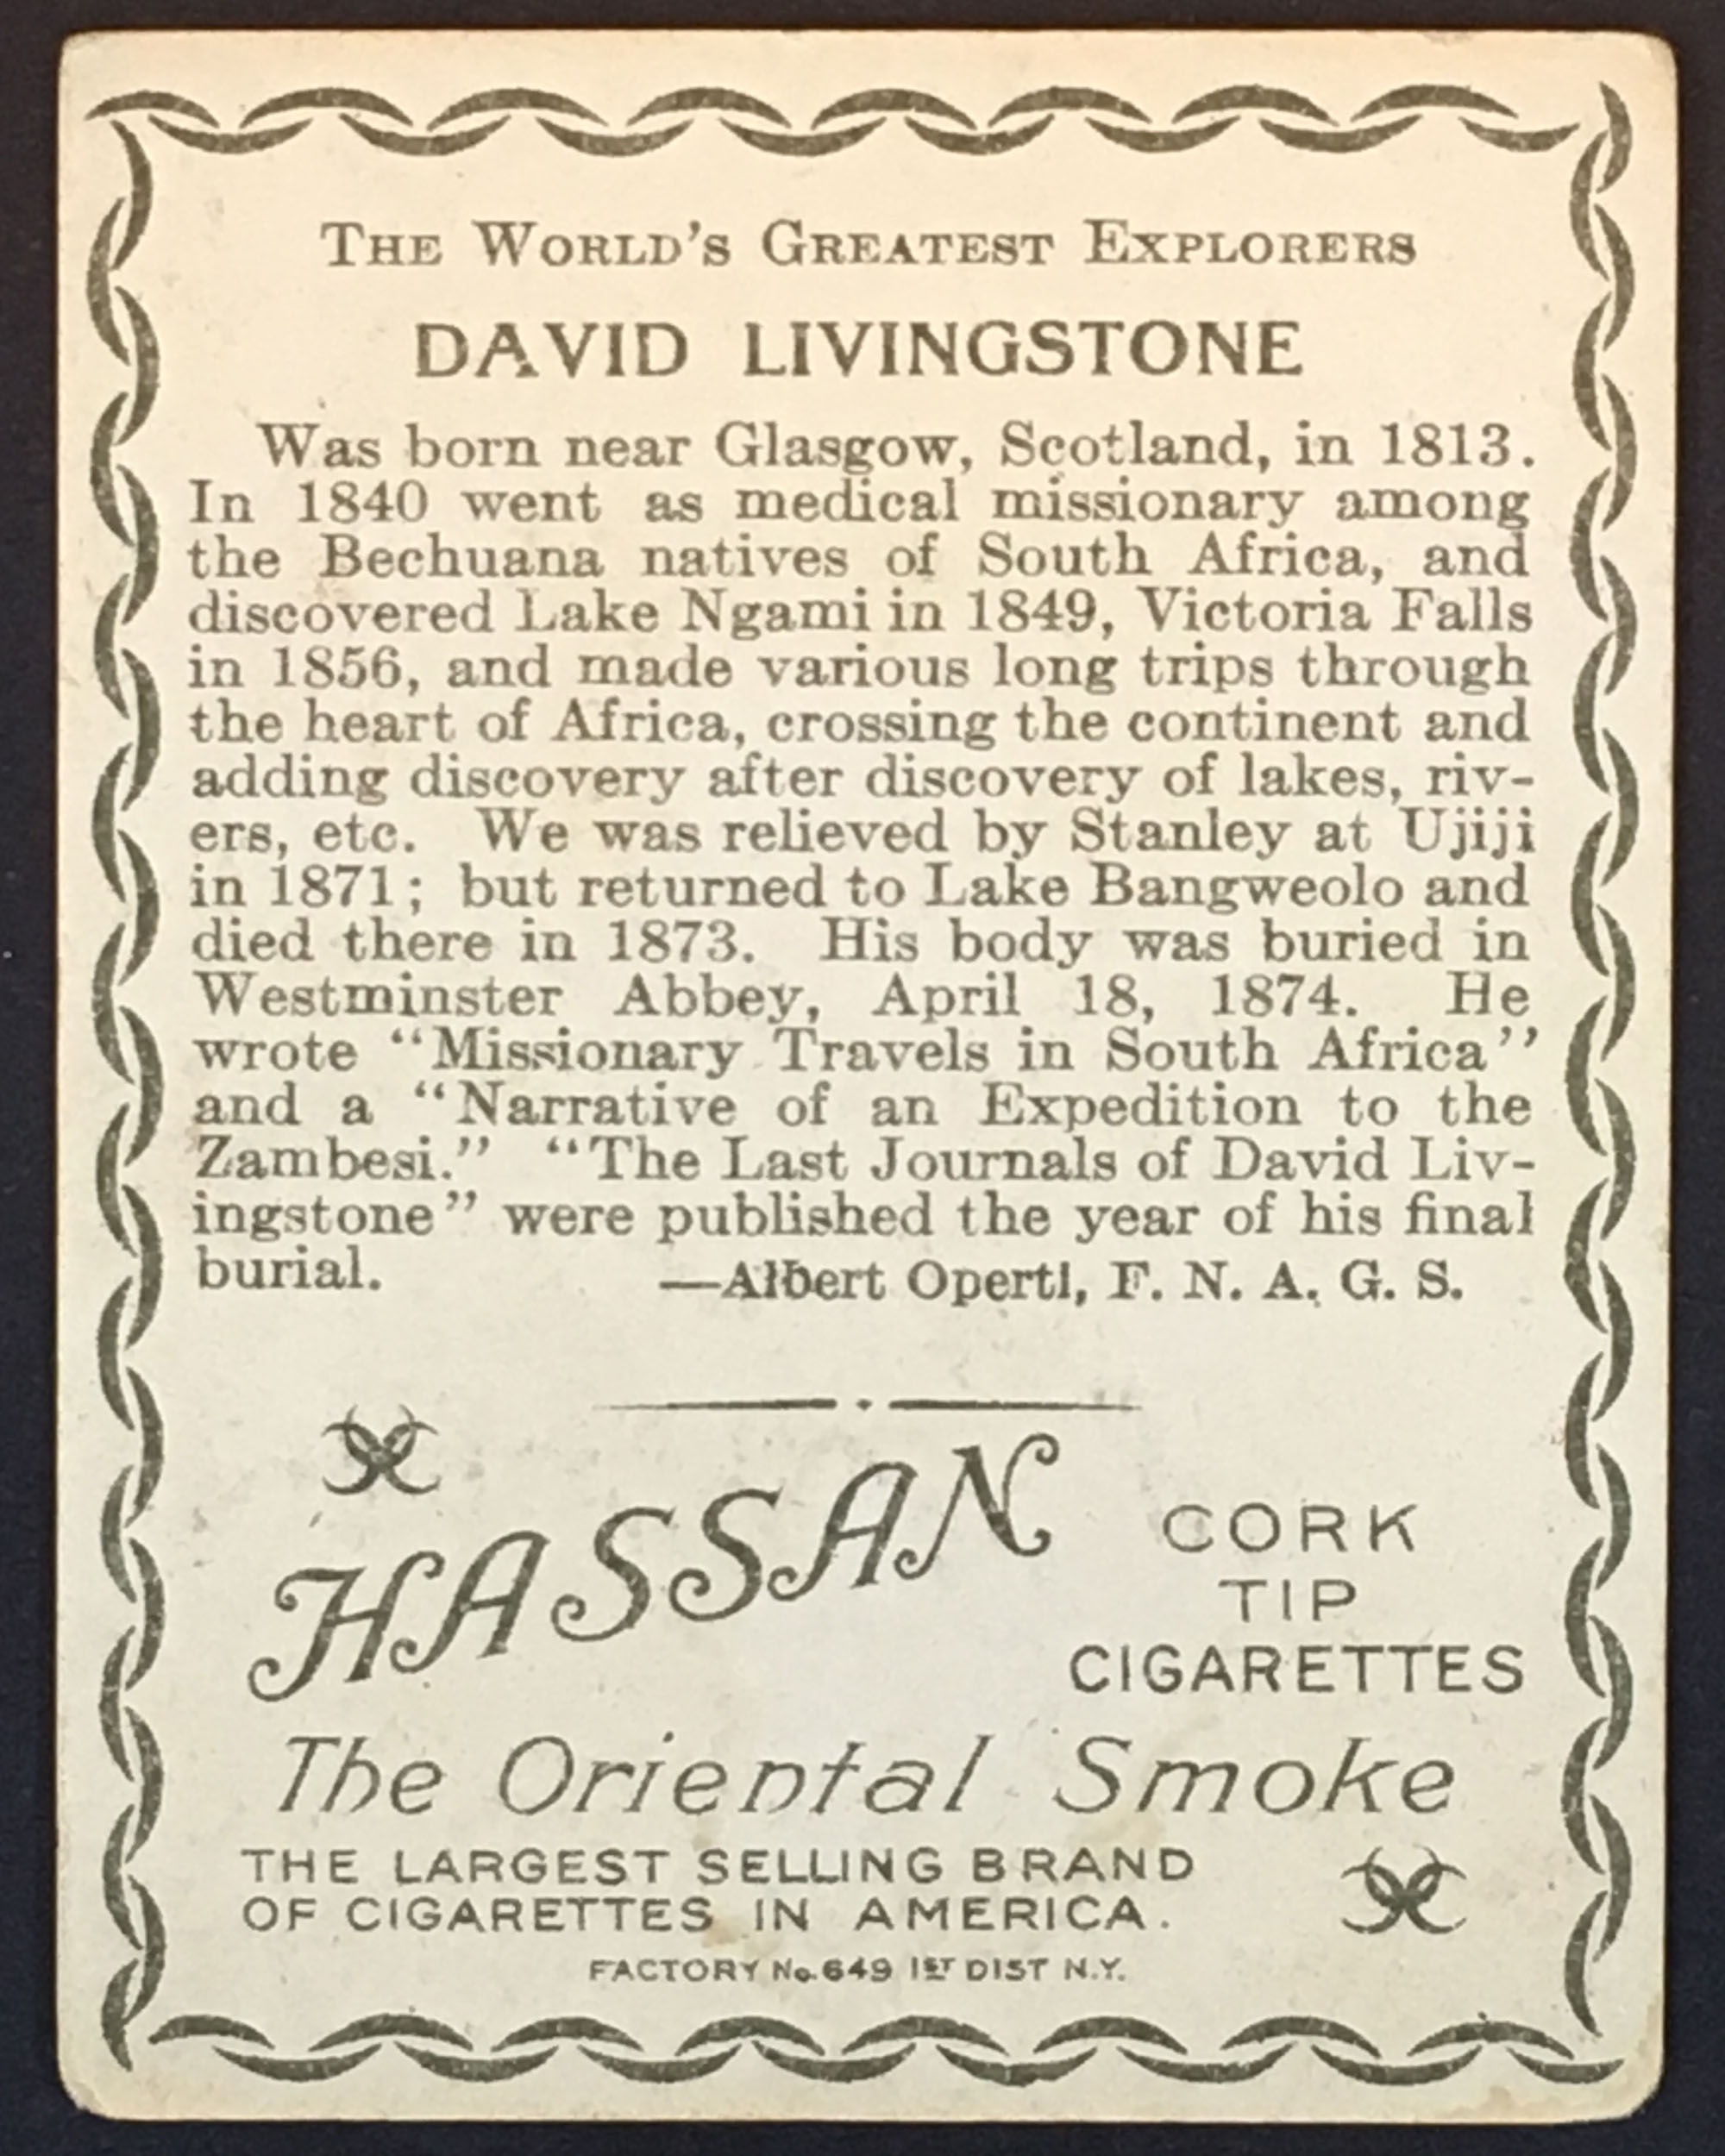 Greatest Explorers Tobacco Trading Card: David Livingstone, 1910, verso. Image copyright Adrian S. Wisnicki. Creative Commons Attribution-NonCommercial 3.0 Unported (https://creativecommons.org/licenses/by-nc/3.0/).